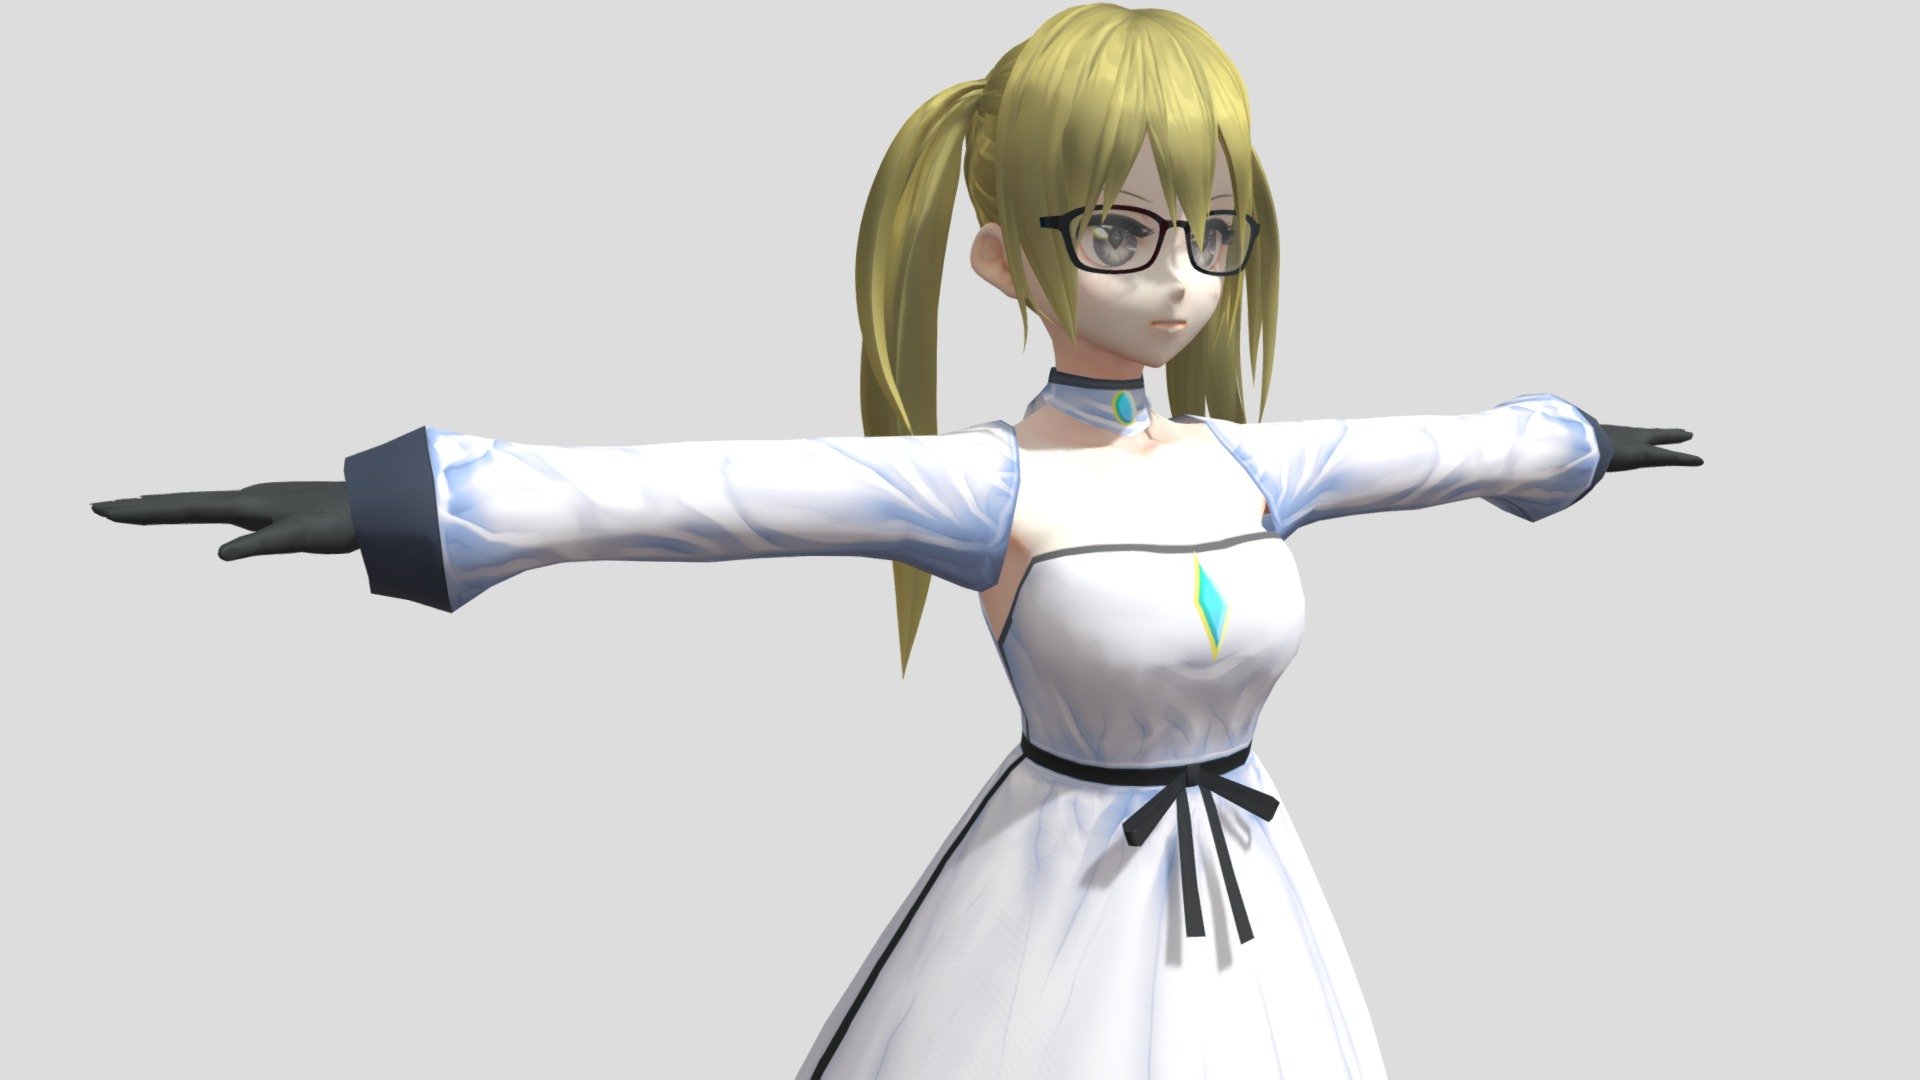 Model preview



This character model belongs to Japanese anime style, all models has been converted into fbx file using blender, users can add their favorite animations on mixamo website, then apply to unity versions above 2019



Character : Zoe

Verts:24302

Tris:35075

Fourteen textures for the character



This package contains VRM files, which can make the character module more refined, please refer to the manual for details



▶Commercial use allowed

▶Forbid secondary sales



Welcome add my website to credit :

Sketchfab

Pixiv

VRoidHub
 - 【Anime Character / alex94i60】Zoe - Buy Royalty Free 3D model by 3D動漫風角色屋 / 3D Anime Character Store (@alex94i60) 3d model